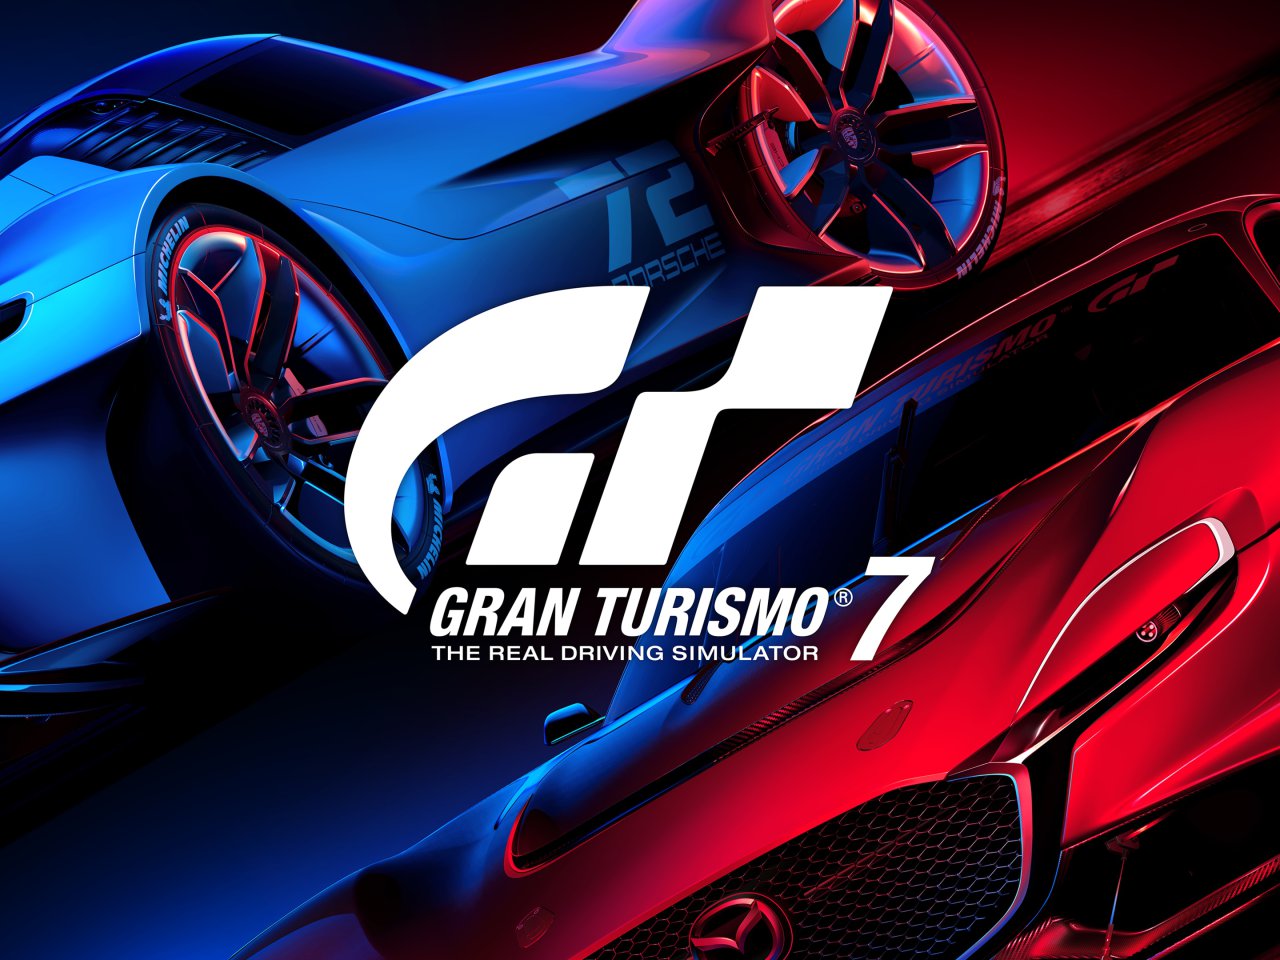 Gran Turismo 7 for the PS4 and PS5